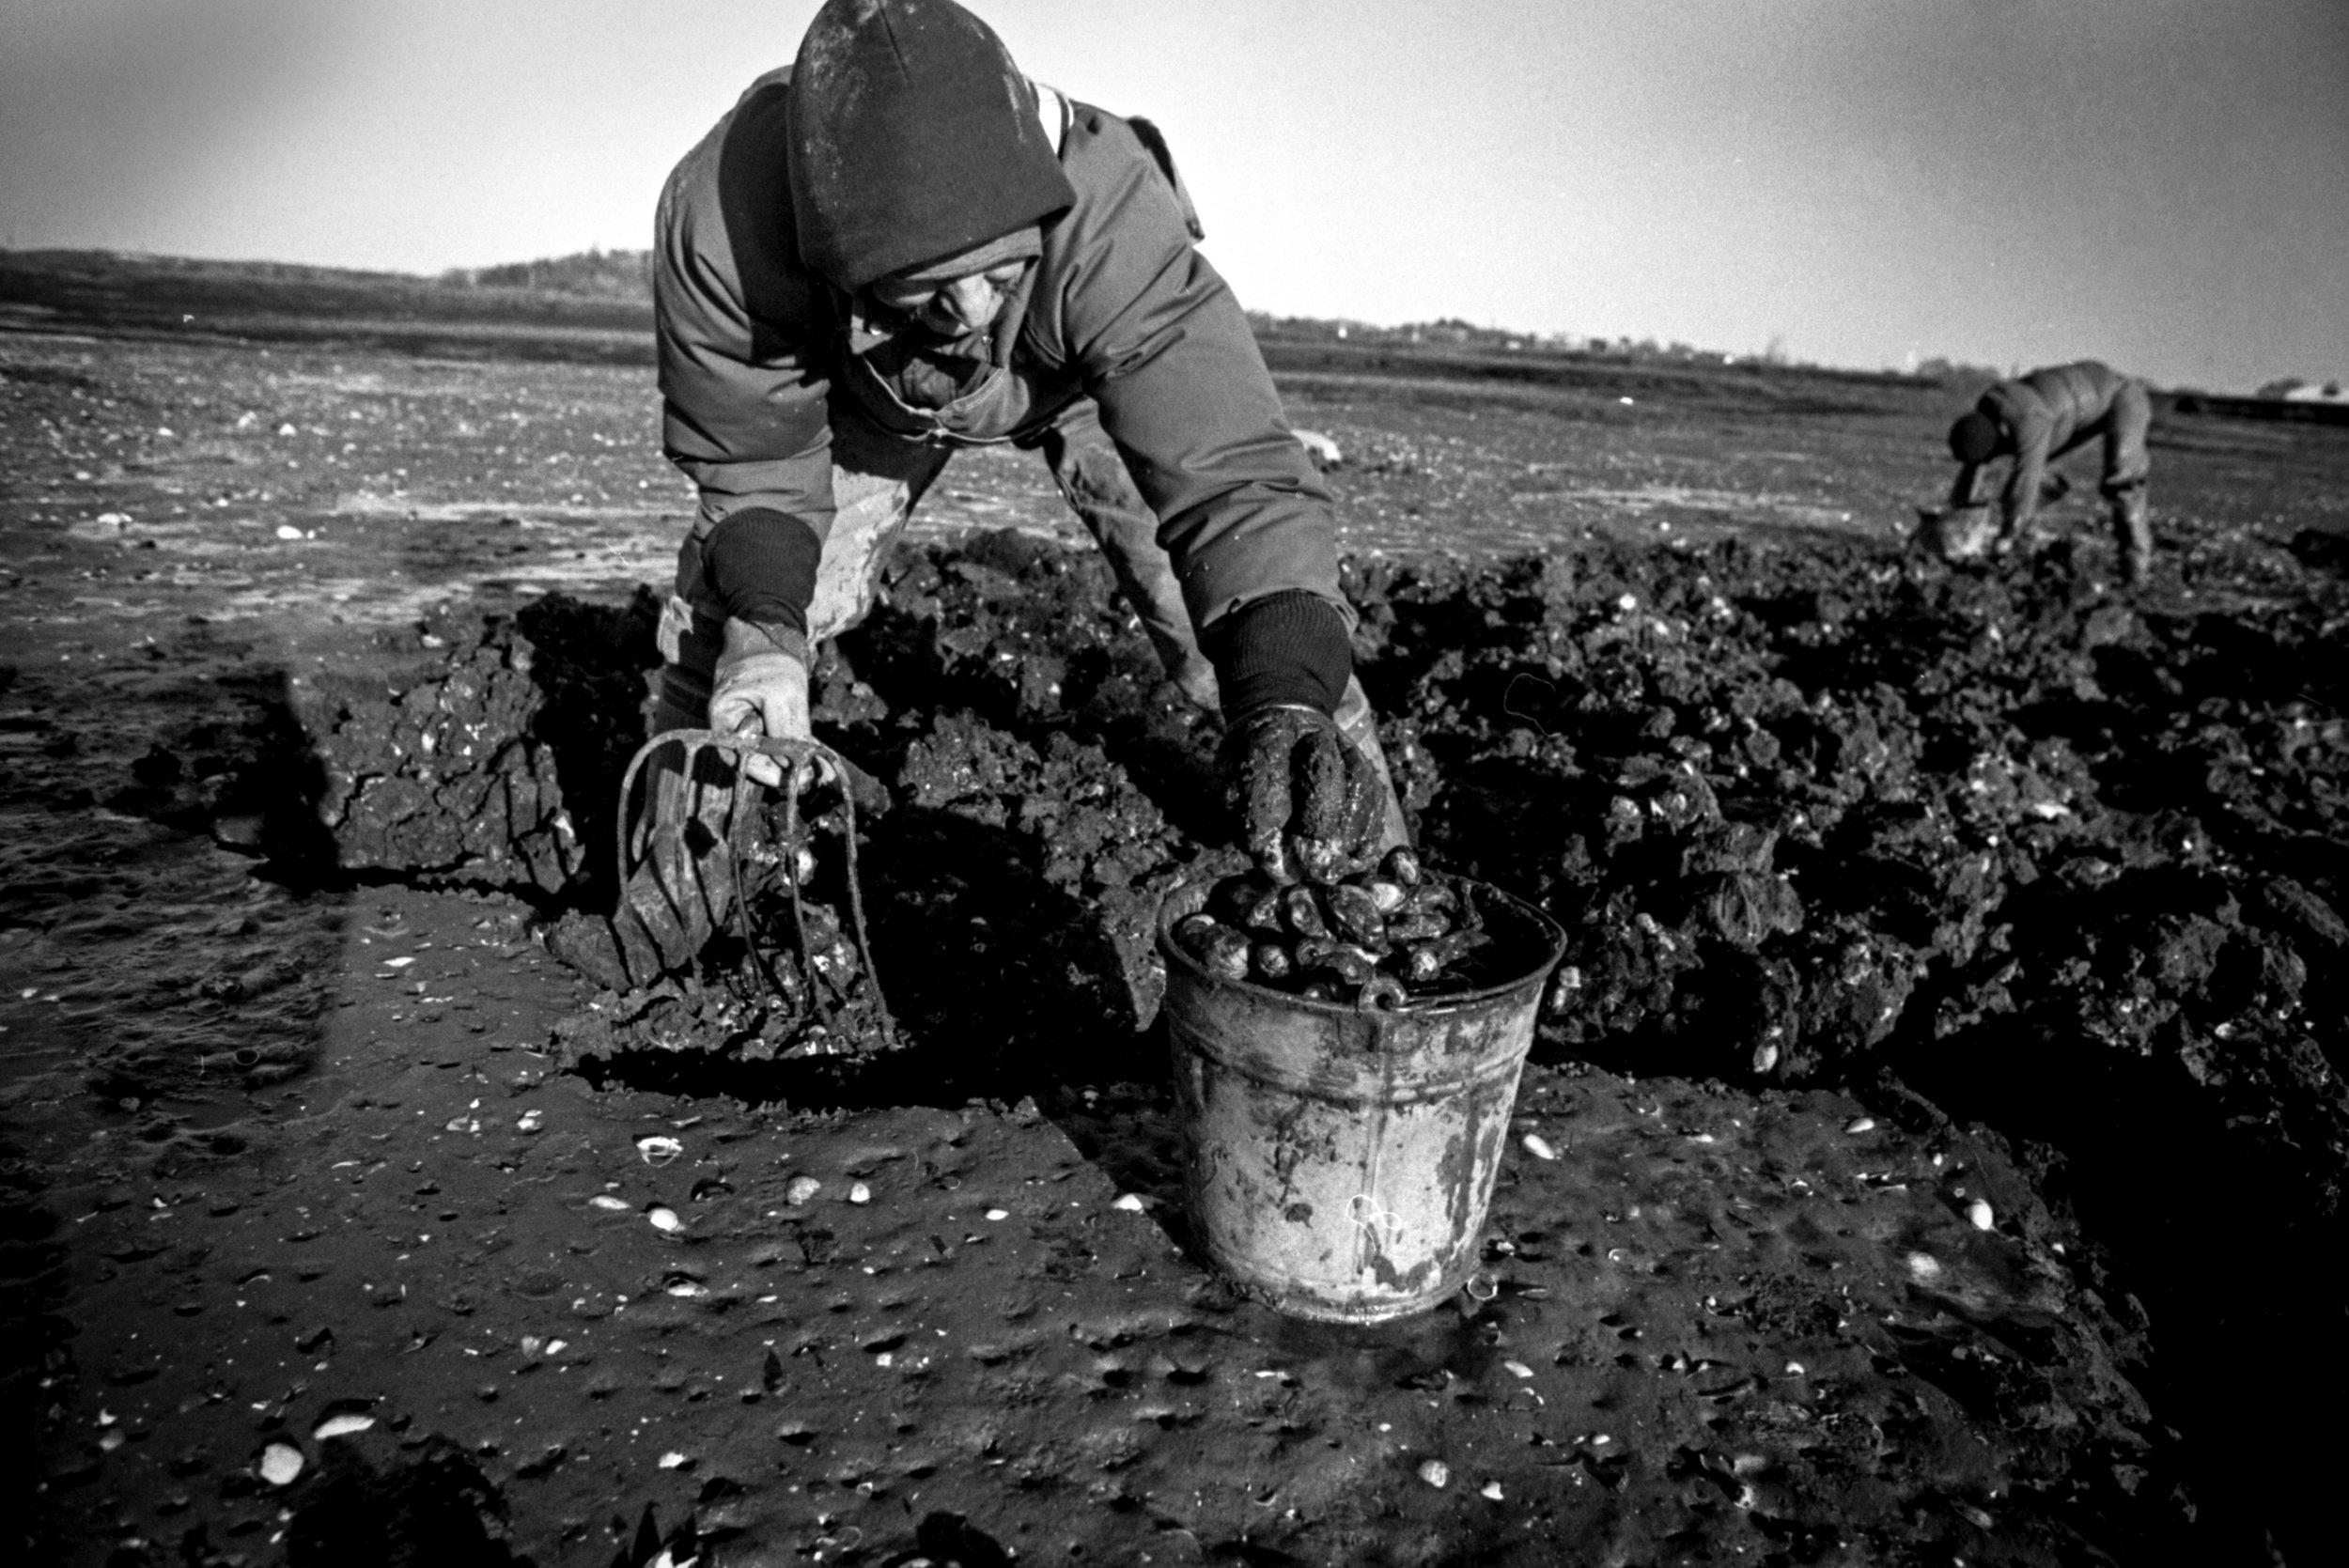   [2] Stan Roberts digs clams off Essex Avenue in a flat on the Annisquam River, 1982. Photograph by Jim Mahoney. &nbsp; 